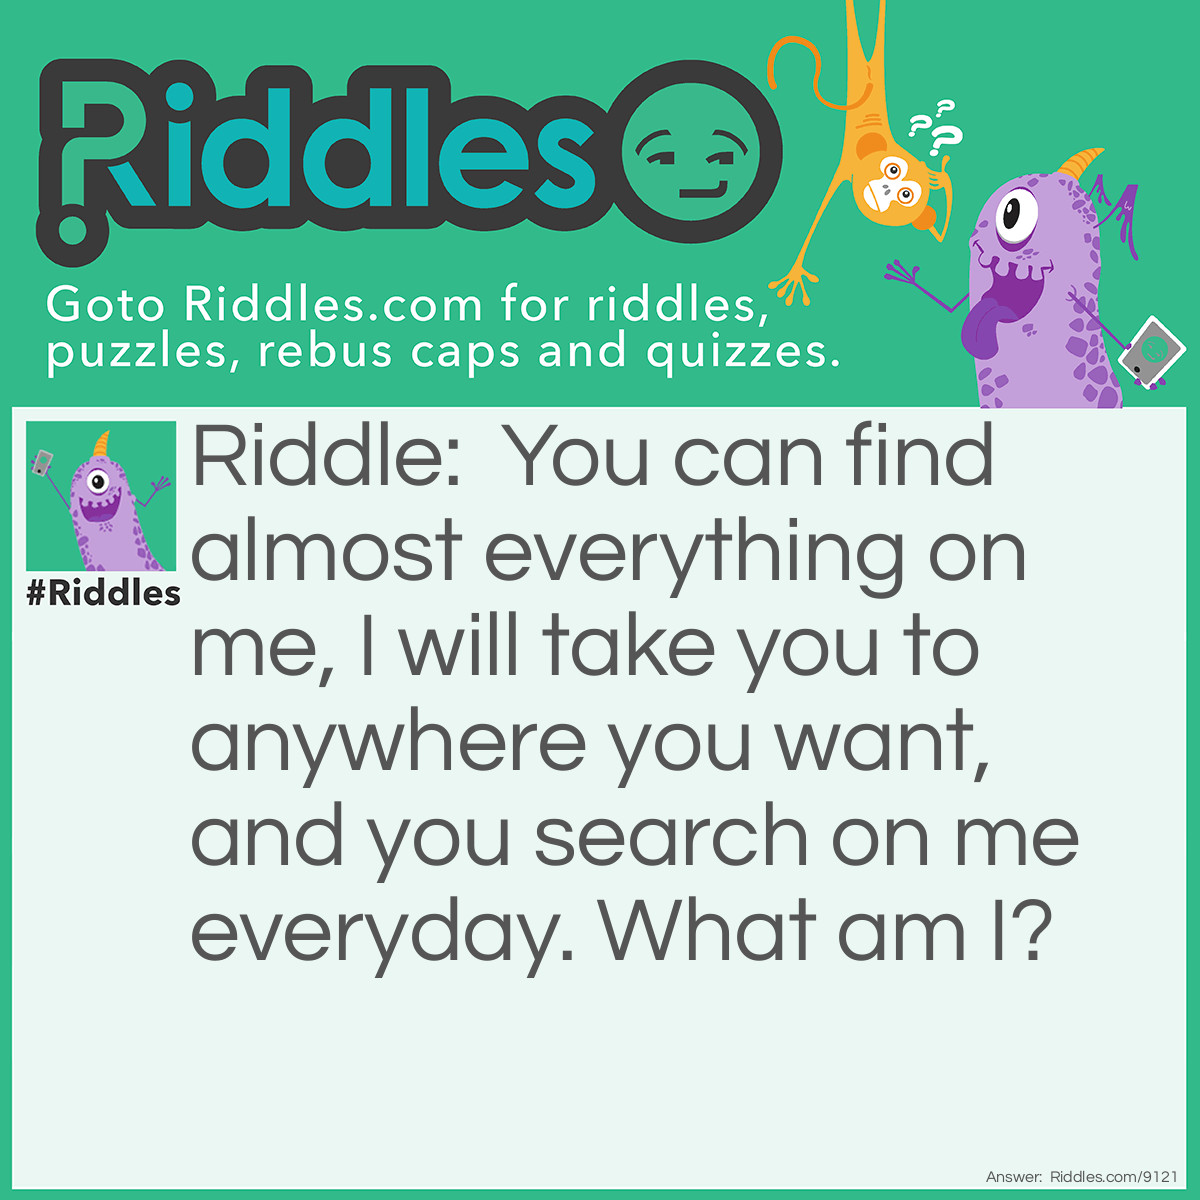 Riddle: You can find almost everything on me, I will take you to anywhere you want, and you search on me everyday. What am I? Answer: The Internet.